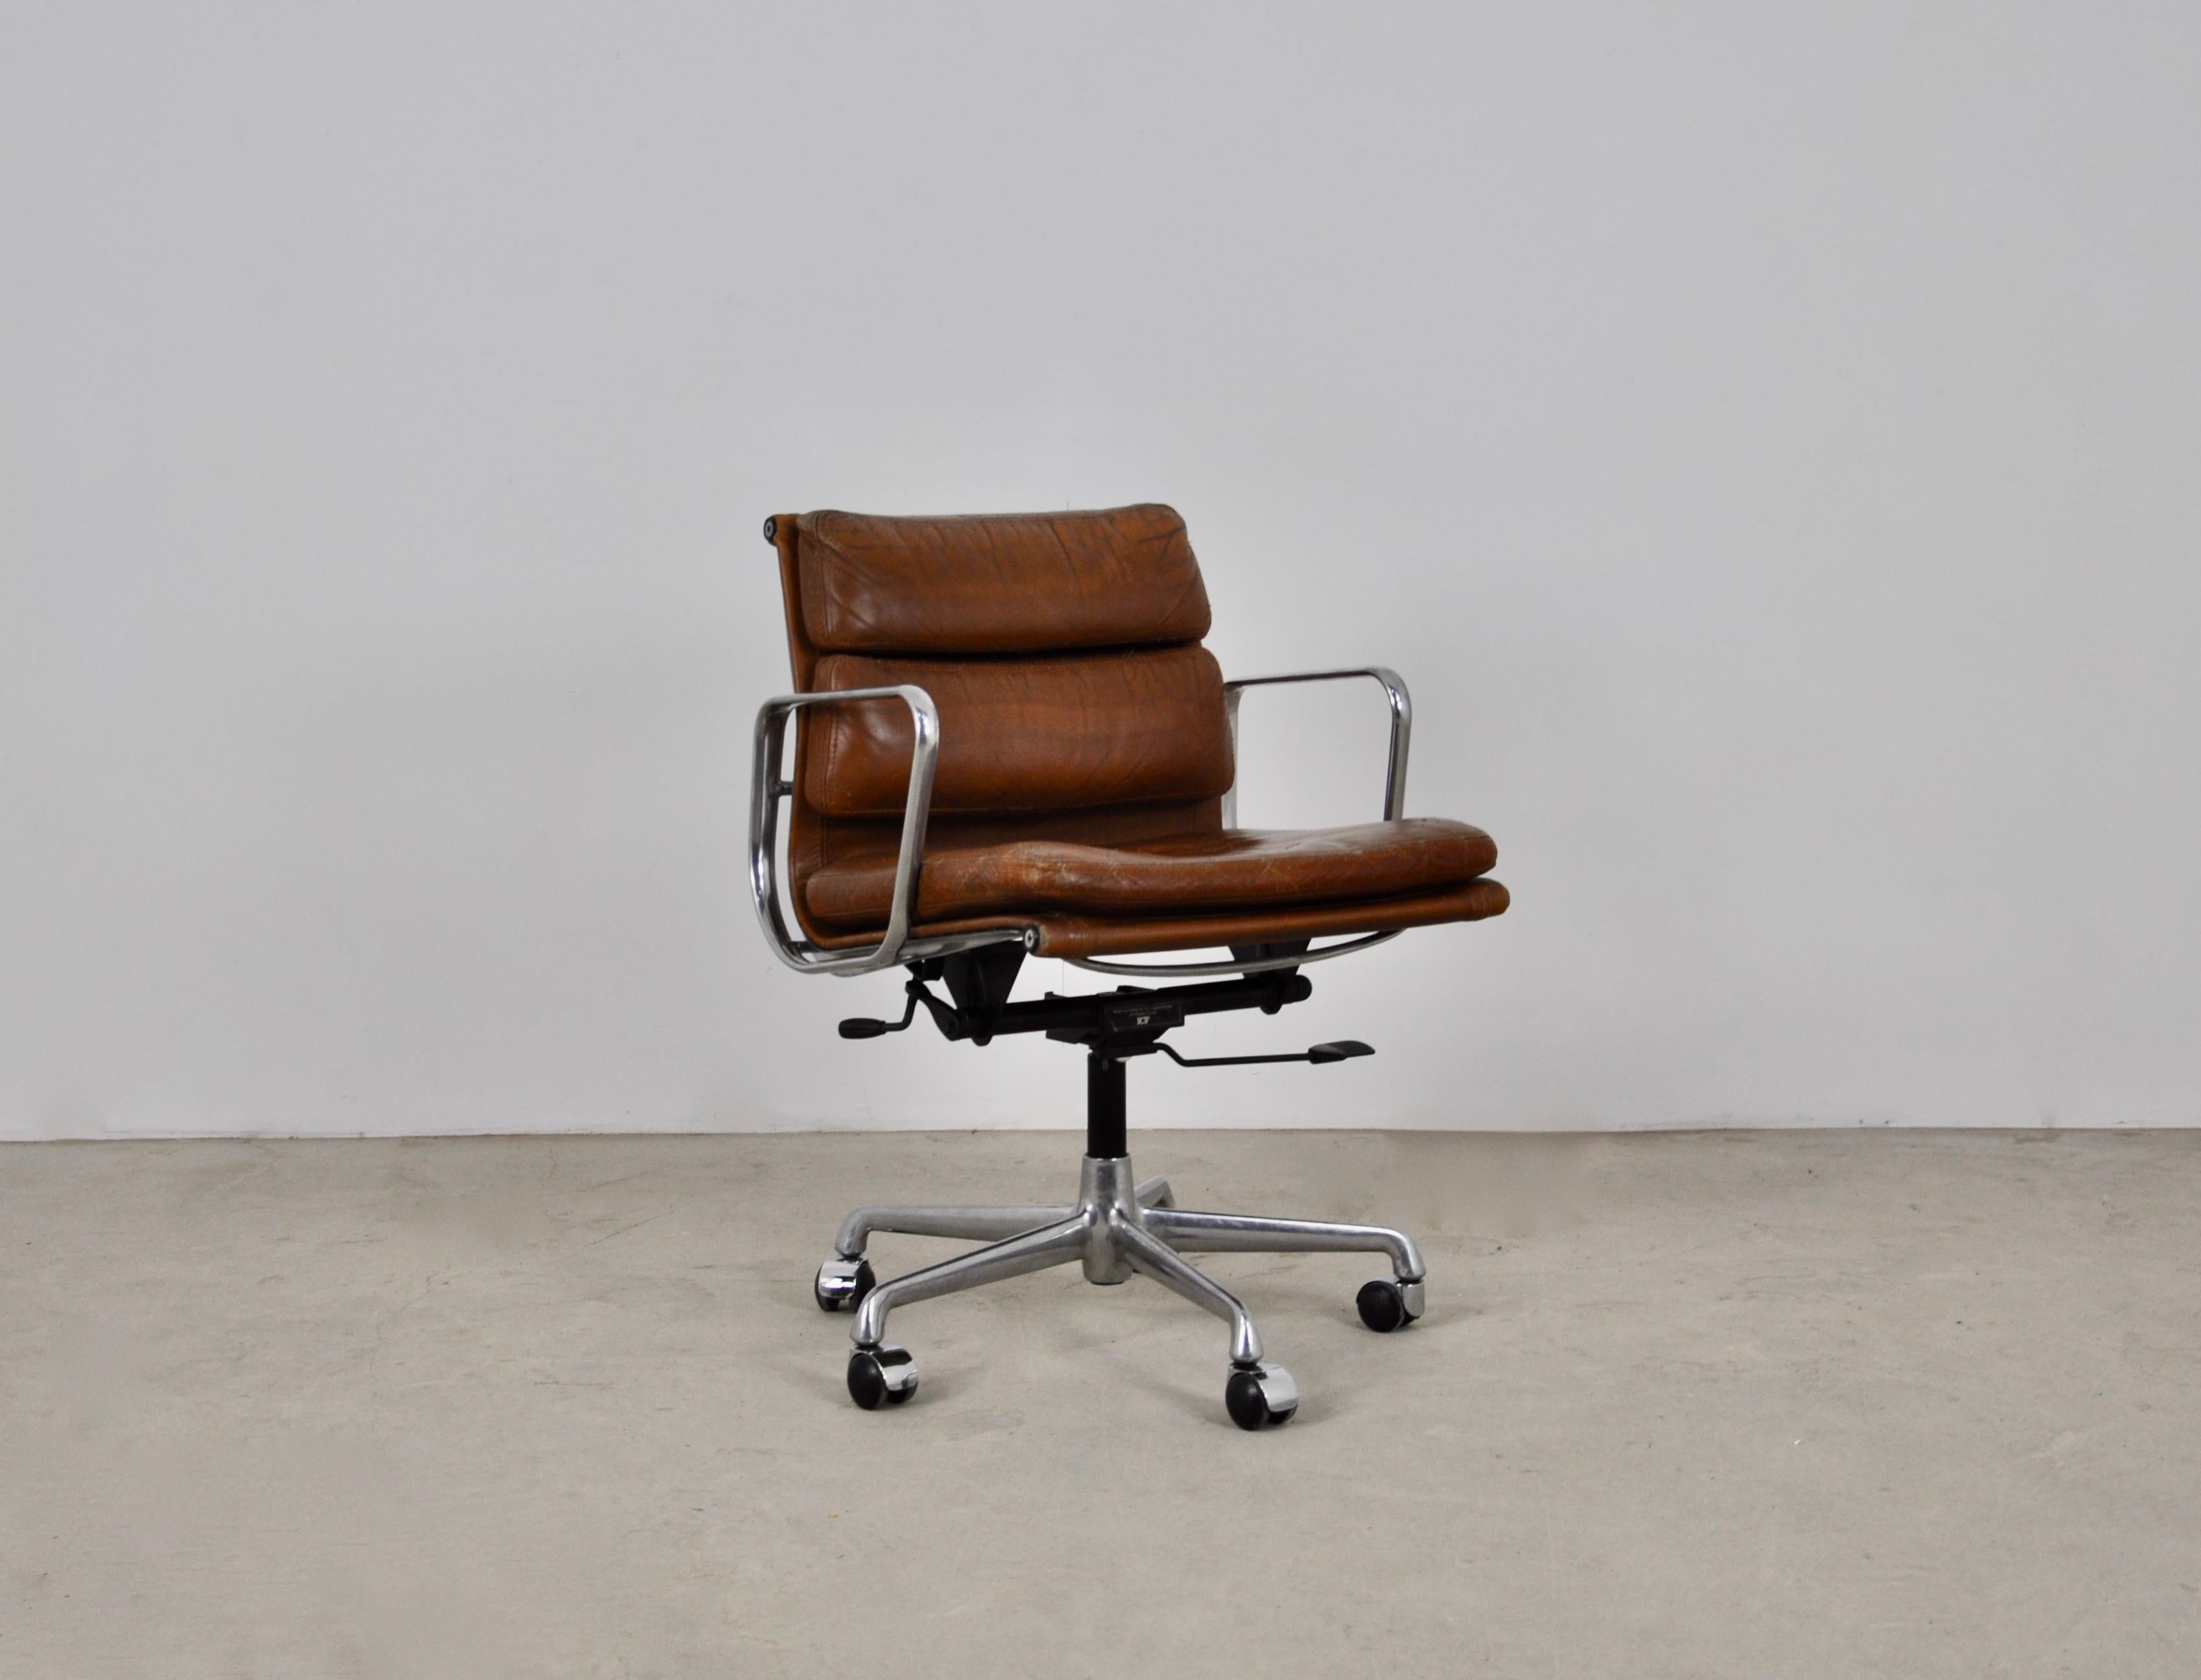 Brown leather and aluminium armchair. Stamped ICF. Height and tilt adjustable. Maximum height: 92 cm, minimum: 81 cm. Maximum seat height: 62 cm, minimum: 51 cm. Wear due to time and age of the chair.